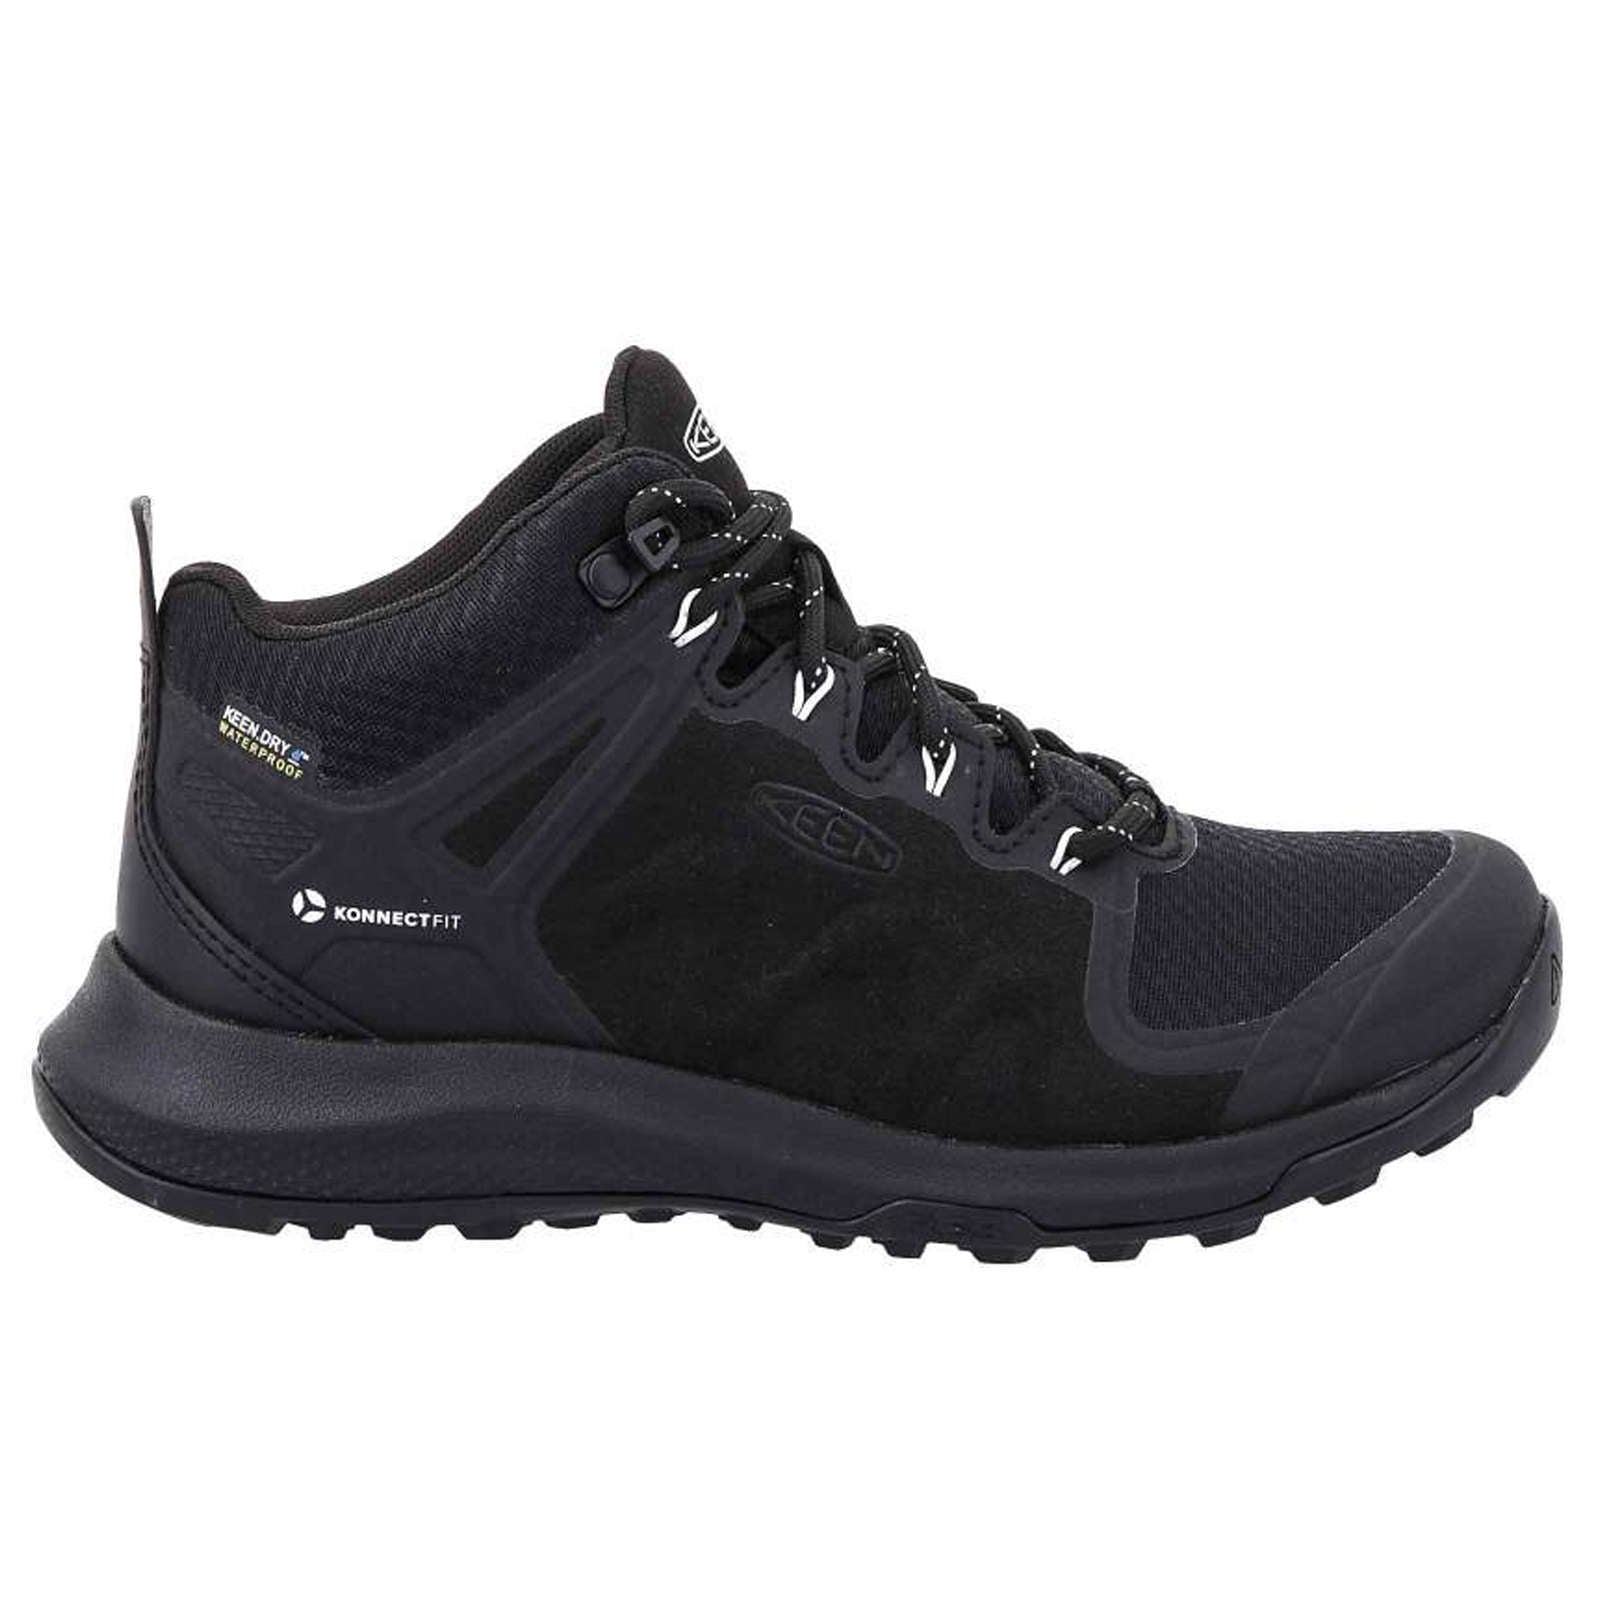 Keen Explore Mid Textile Women's Waterproof Hiking Boots#color_black star white